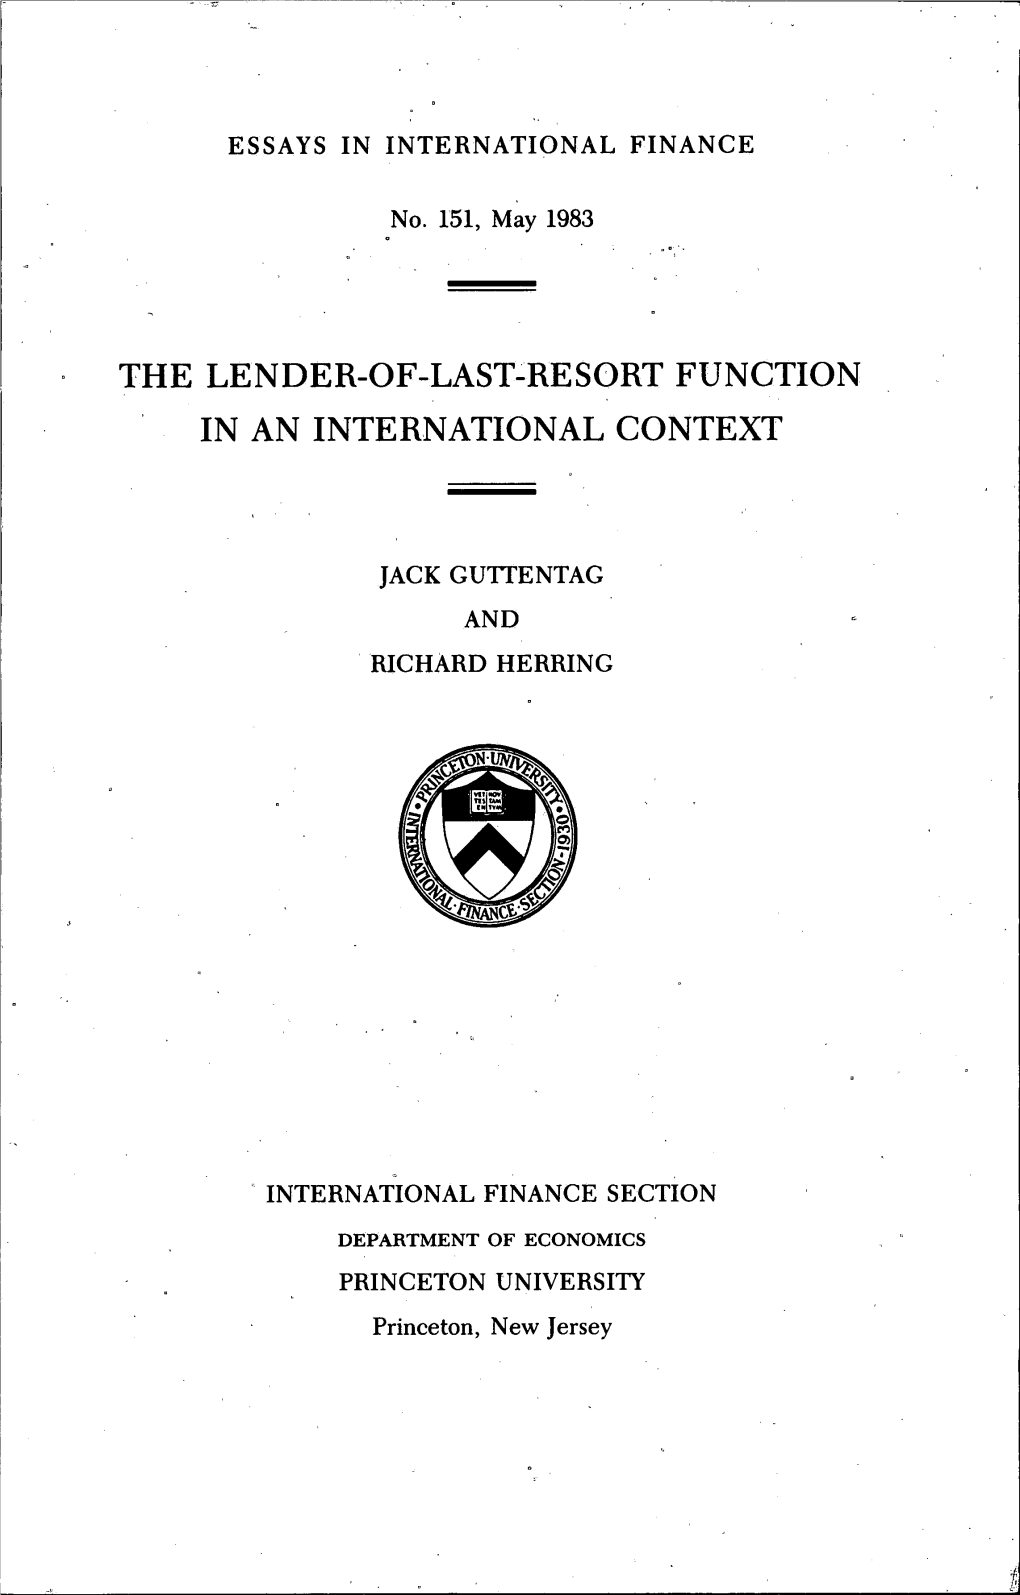 The Lender-Of-Last-Resort Function in an International Context